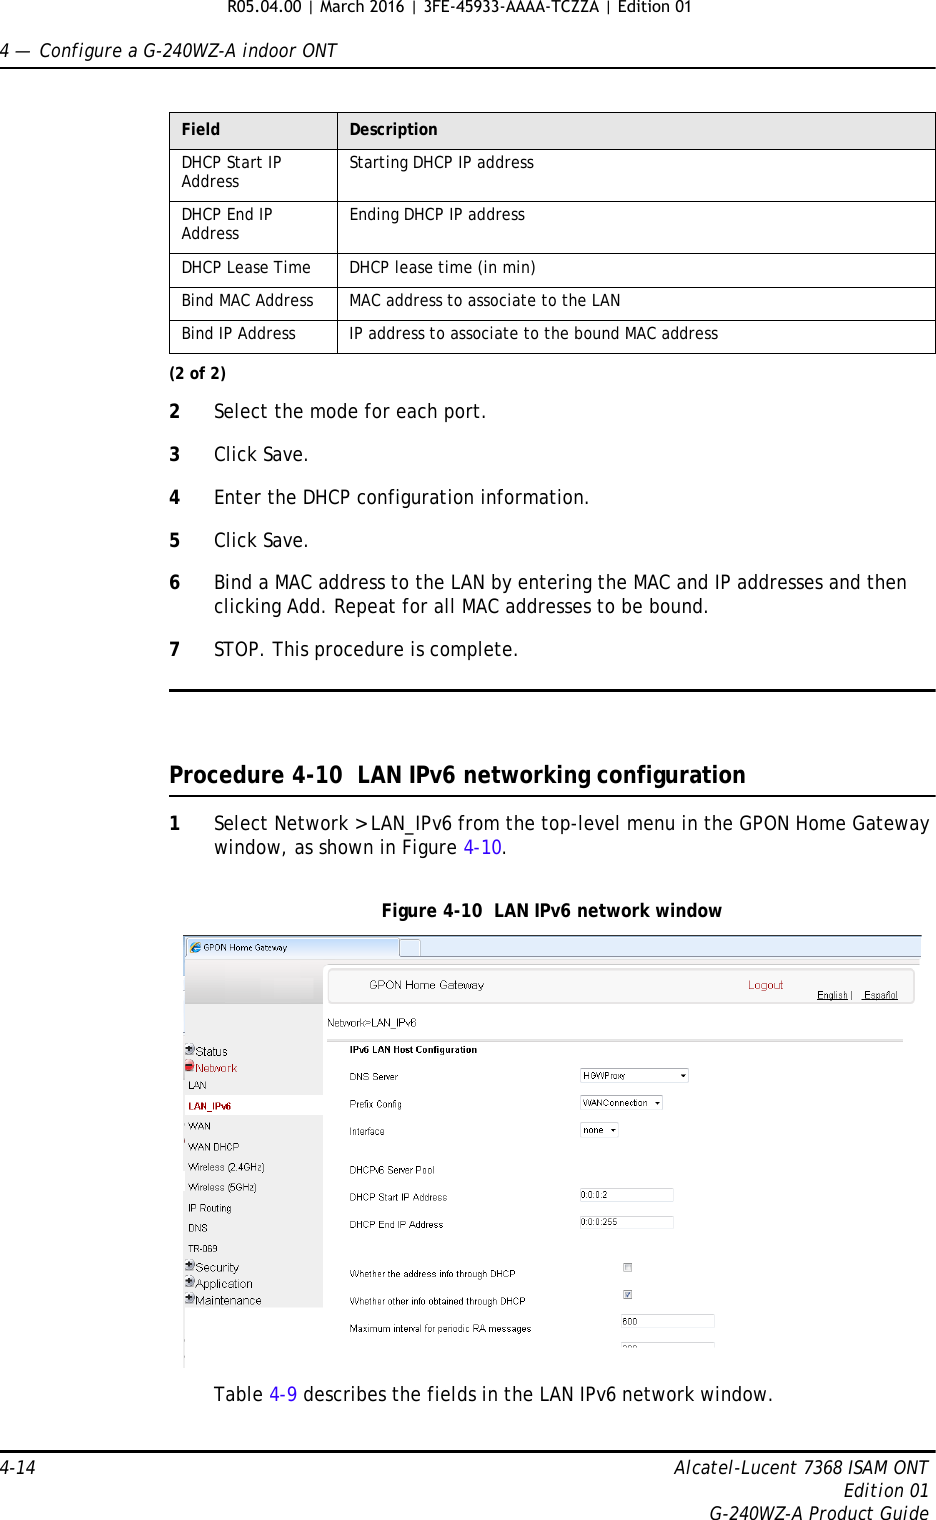 4 —  Configure a G-240WZ-A indoor ONT4-14 Alcatel-Lucent 7368 ISAM ONTEdition 01G-240WZ-A Product Guide2Select the mode for each port.3Click Save.4Enter the DHCP configuration information.5Click Save.6Bind a MAC address to the LAN by entering the MAC and IP addresses and then clicking Add. Repeat for all MAC addresses to be bound.7STOP. This procedure is complete.Procedure 4-10  LAN IPv6 networking configuration1Select Network &gt; LAN_IPv6 from the top-level menu in the GPON Home Gateway window, as shown in Figure 4-10.Figure 4-10  LAN IPv6 network windowTable 4-9 describes the fields in the LAN IPv6 network window.DHCP Start IP Address Starting DHCP IP addressDHCP End IP Address Ending DHCP IP addressDHCP Lease Time DHCP lease time (in min)Bind MAC Address MAC address to associate to the LANBind IP Address IP address to associate to the bound MAC addressField Description(2 of 2)R05.04.00 | March 2016 | 3FE-45933-AAAA-TCZZA | Edition 01 